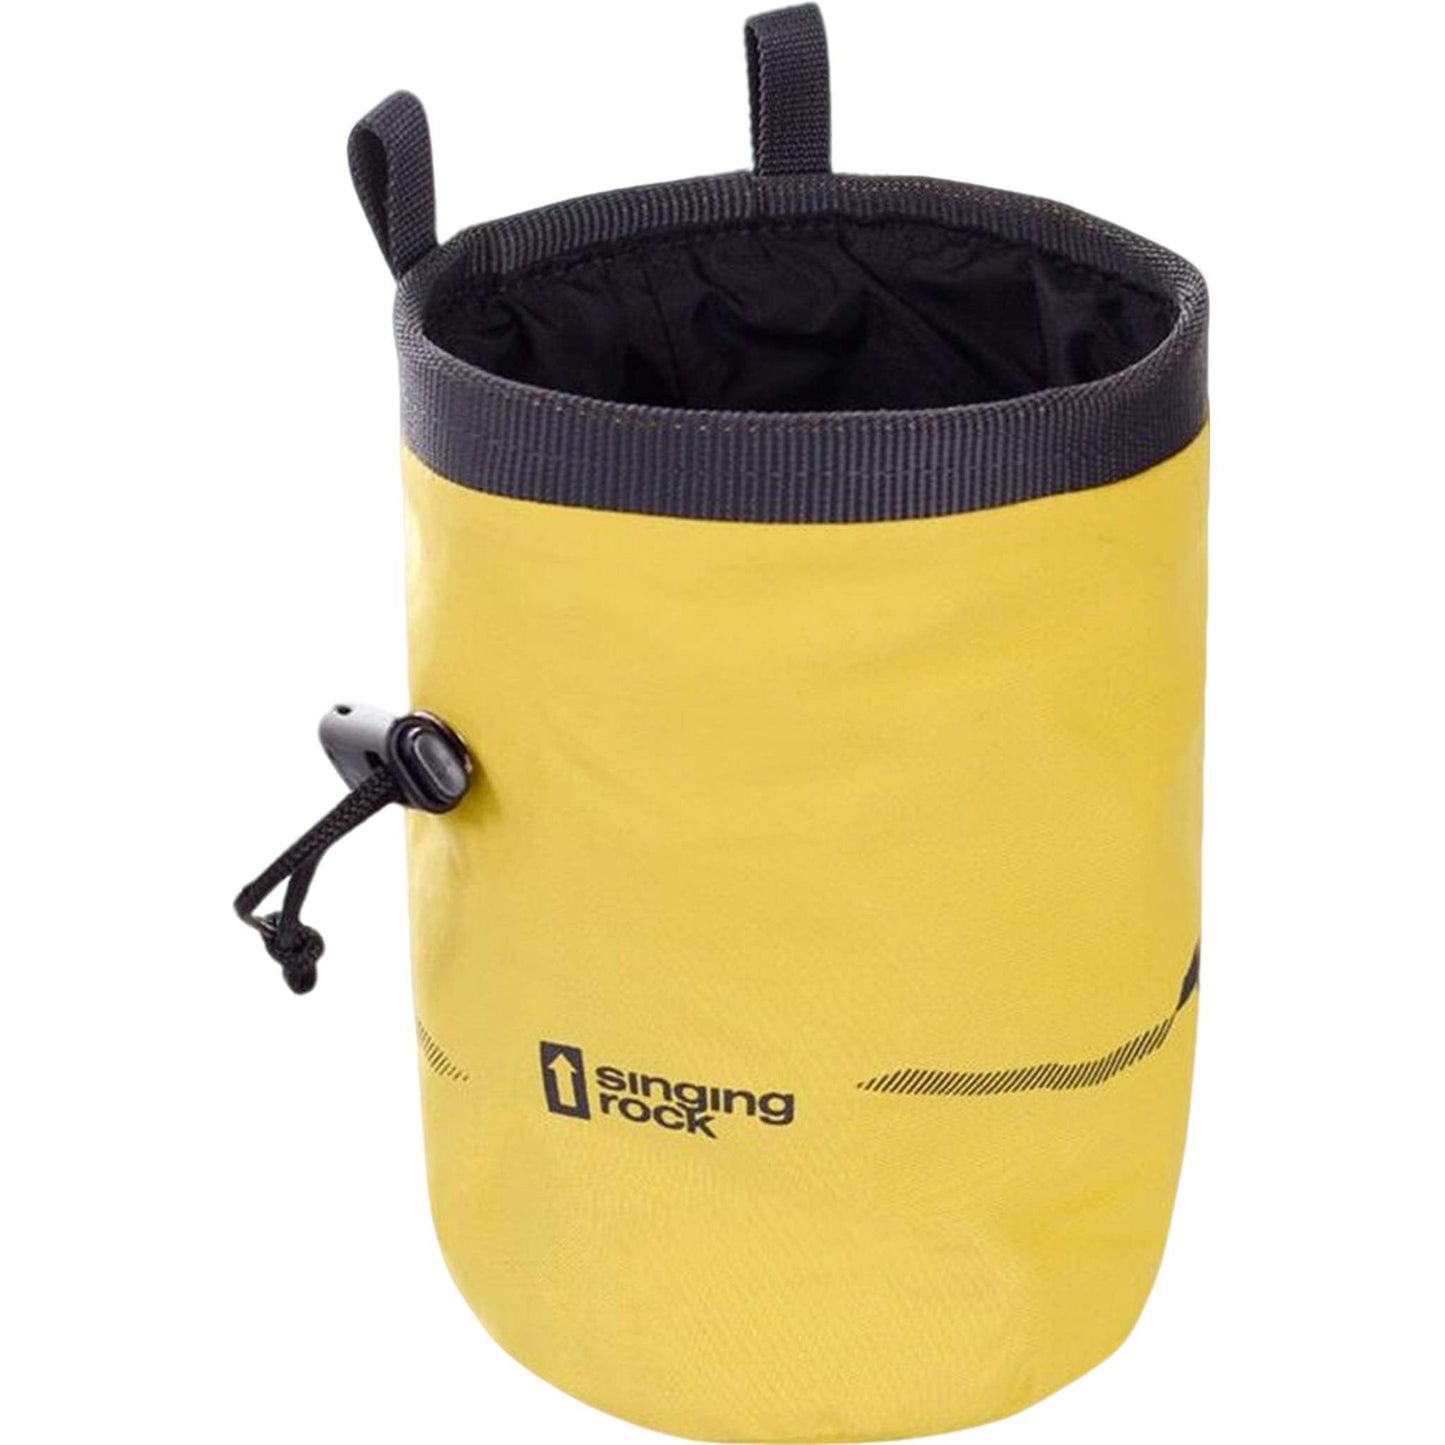 Mountains Minimalistic Chalk Bag for Climbers